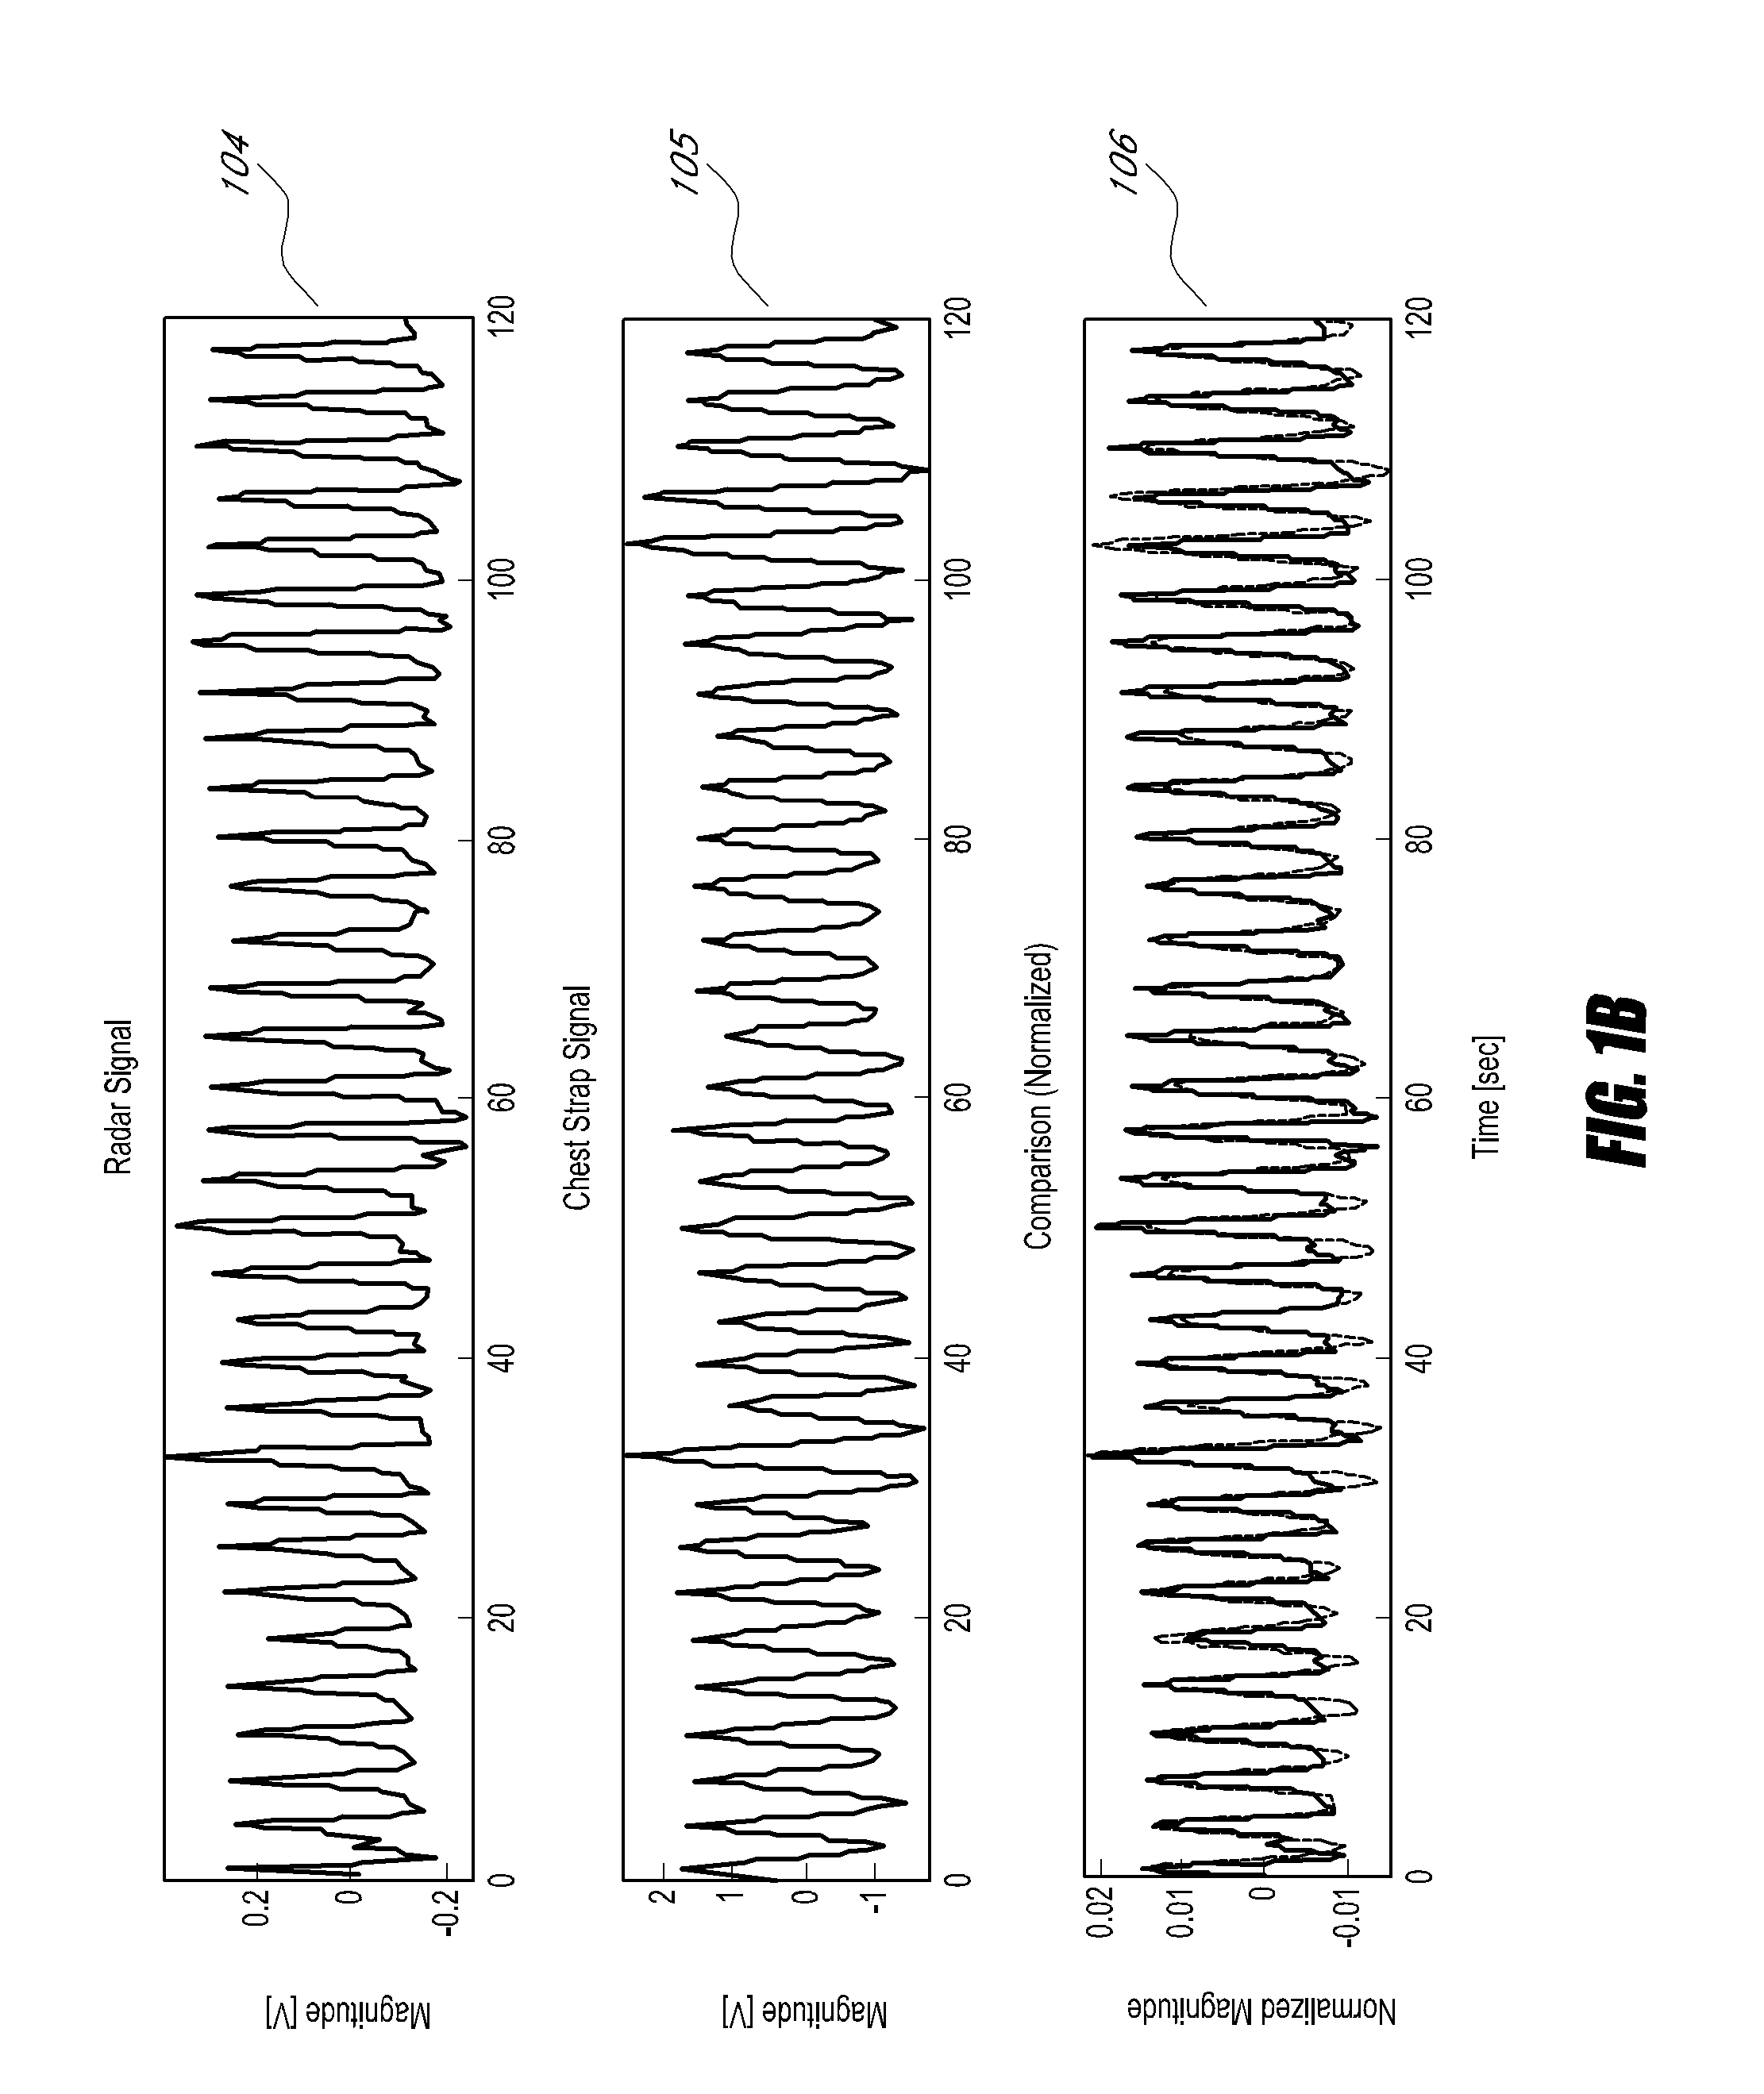 Non-contact physiologic motion sensors and methods for use